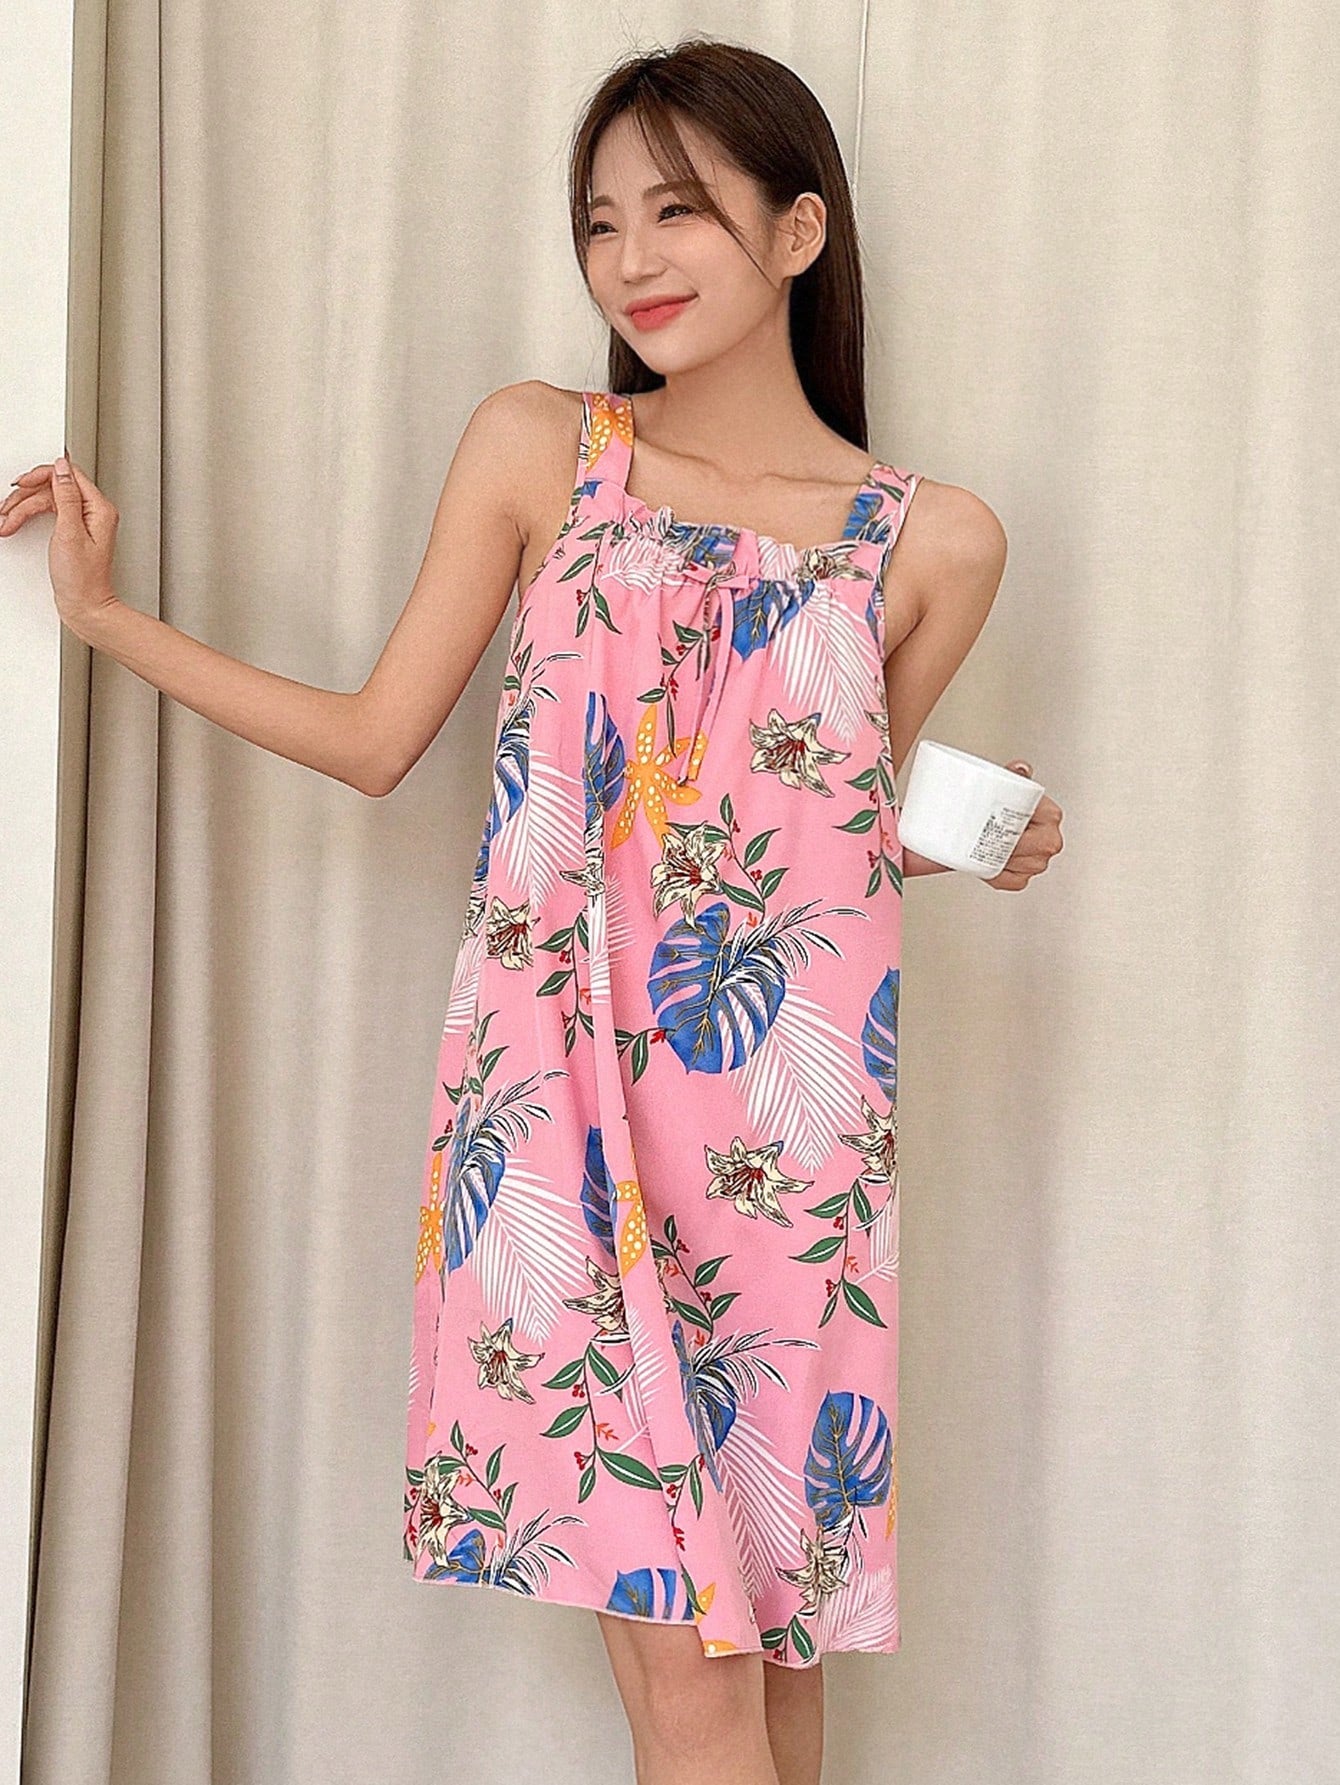 Floral Print Ruffle Trimmed Sleeveless Slip Dress With Spaghetti Straps